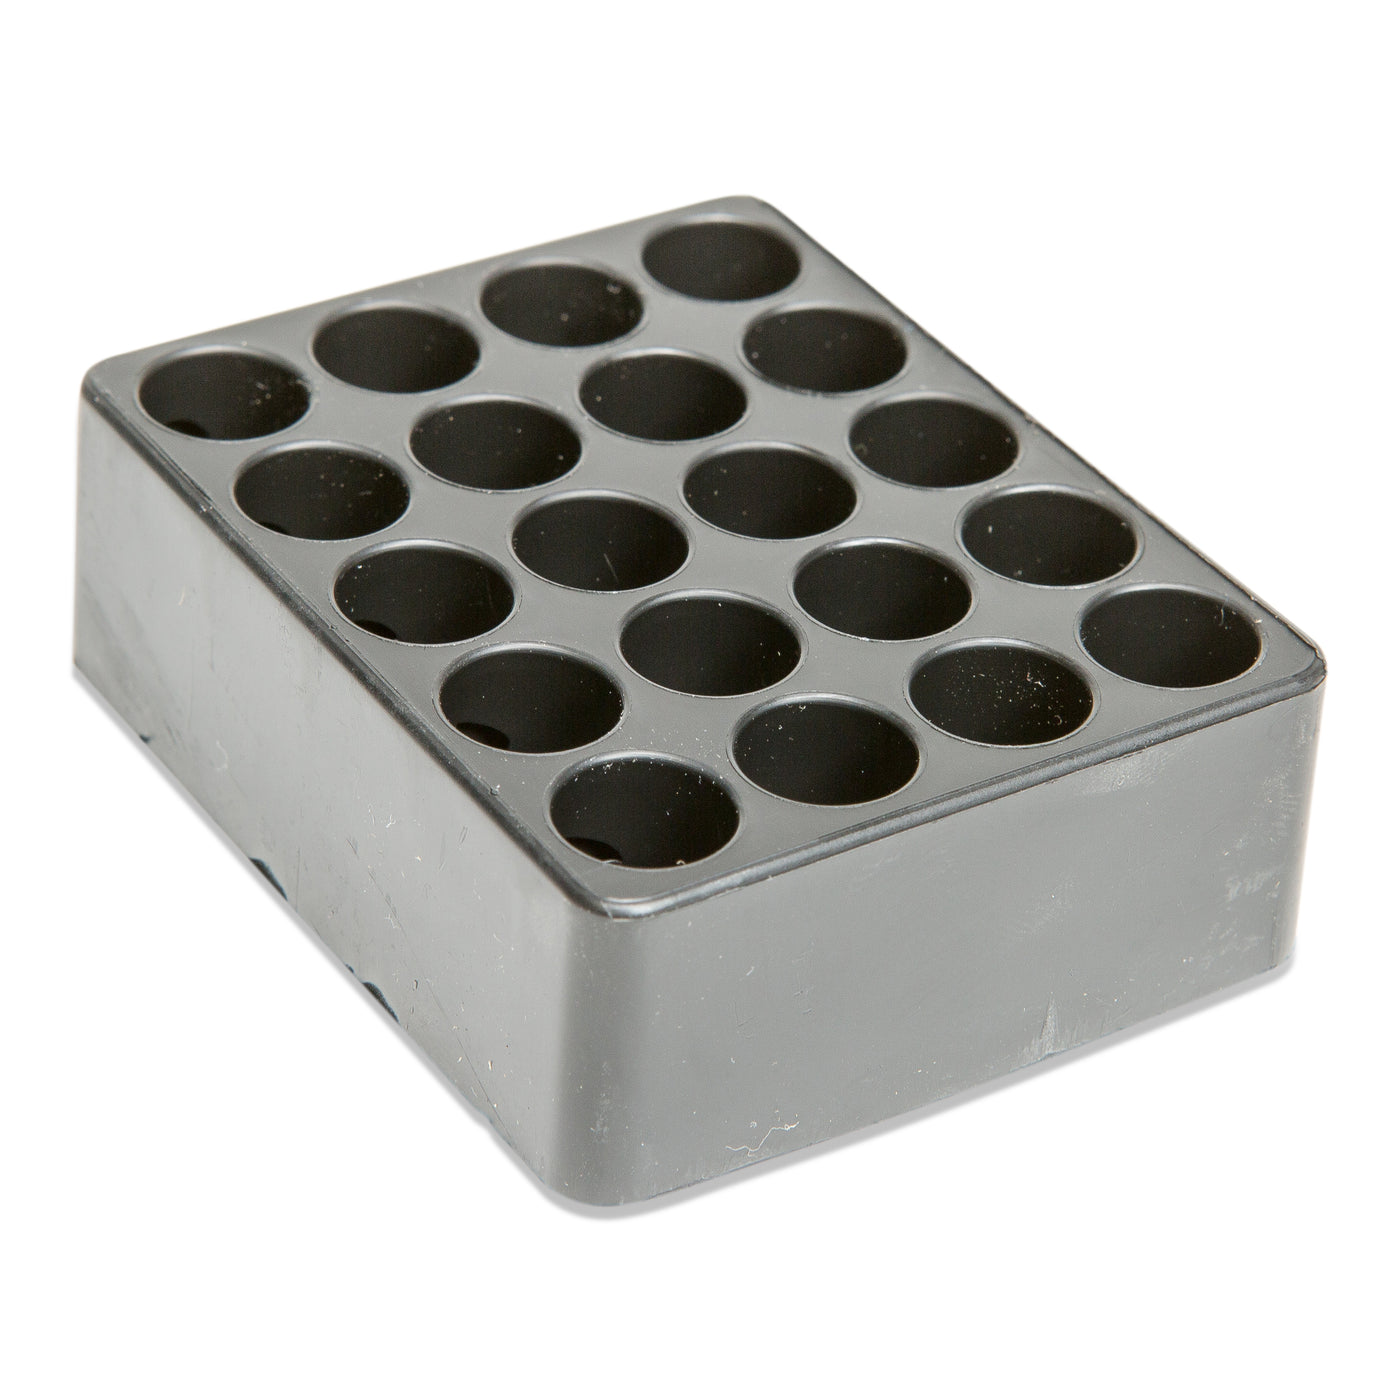 Berry's Bullets 403 38 Special/357 Magnum Ammo Box - 50 Rounds -  Smoke/Black - Smoke/Black